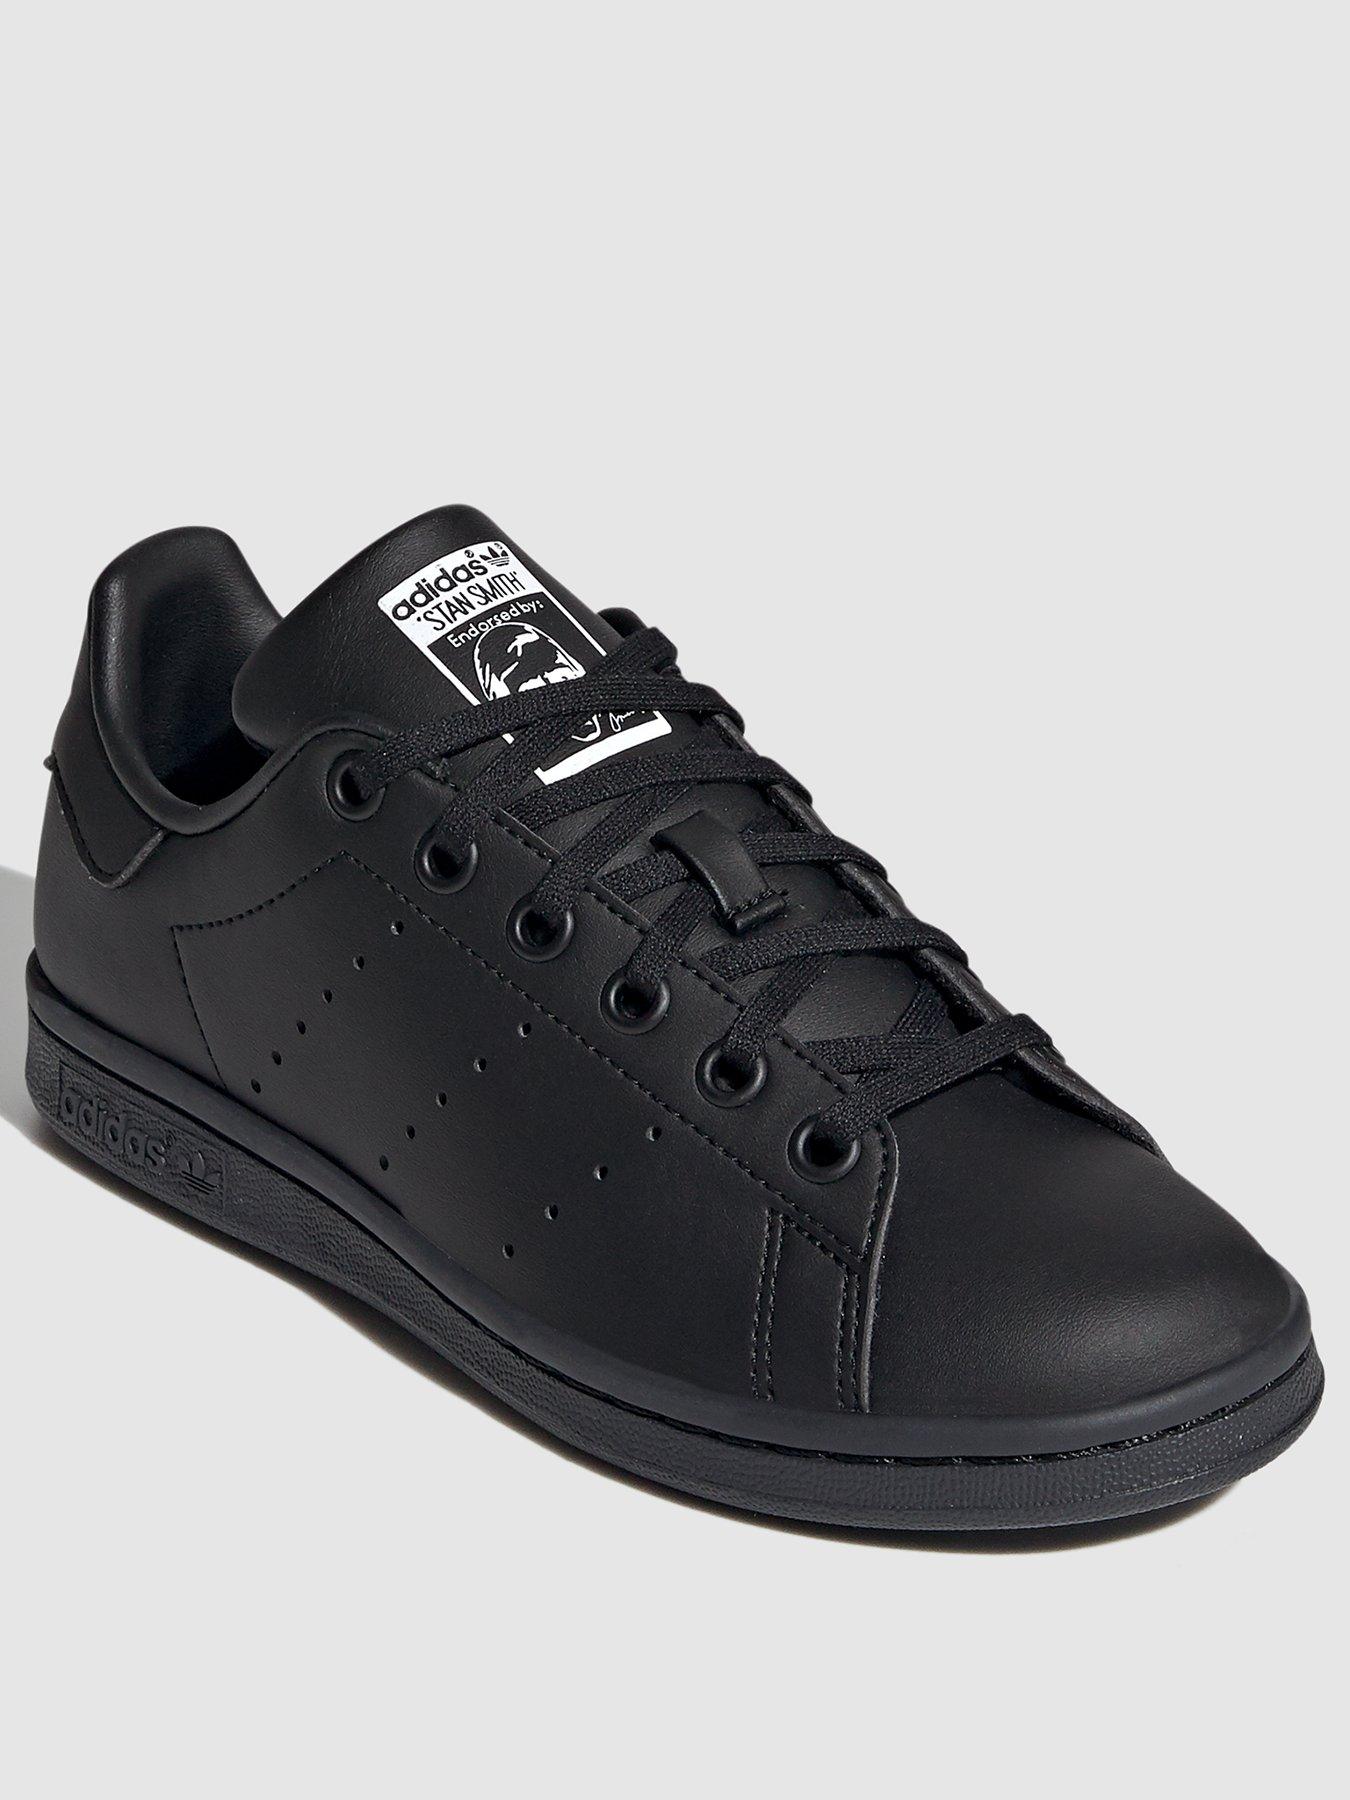 stan smith trainers size 3